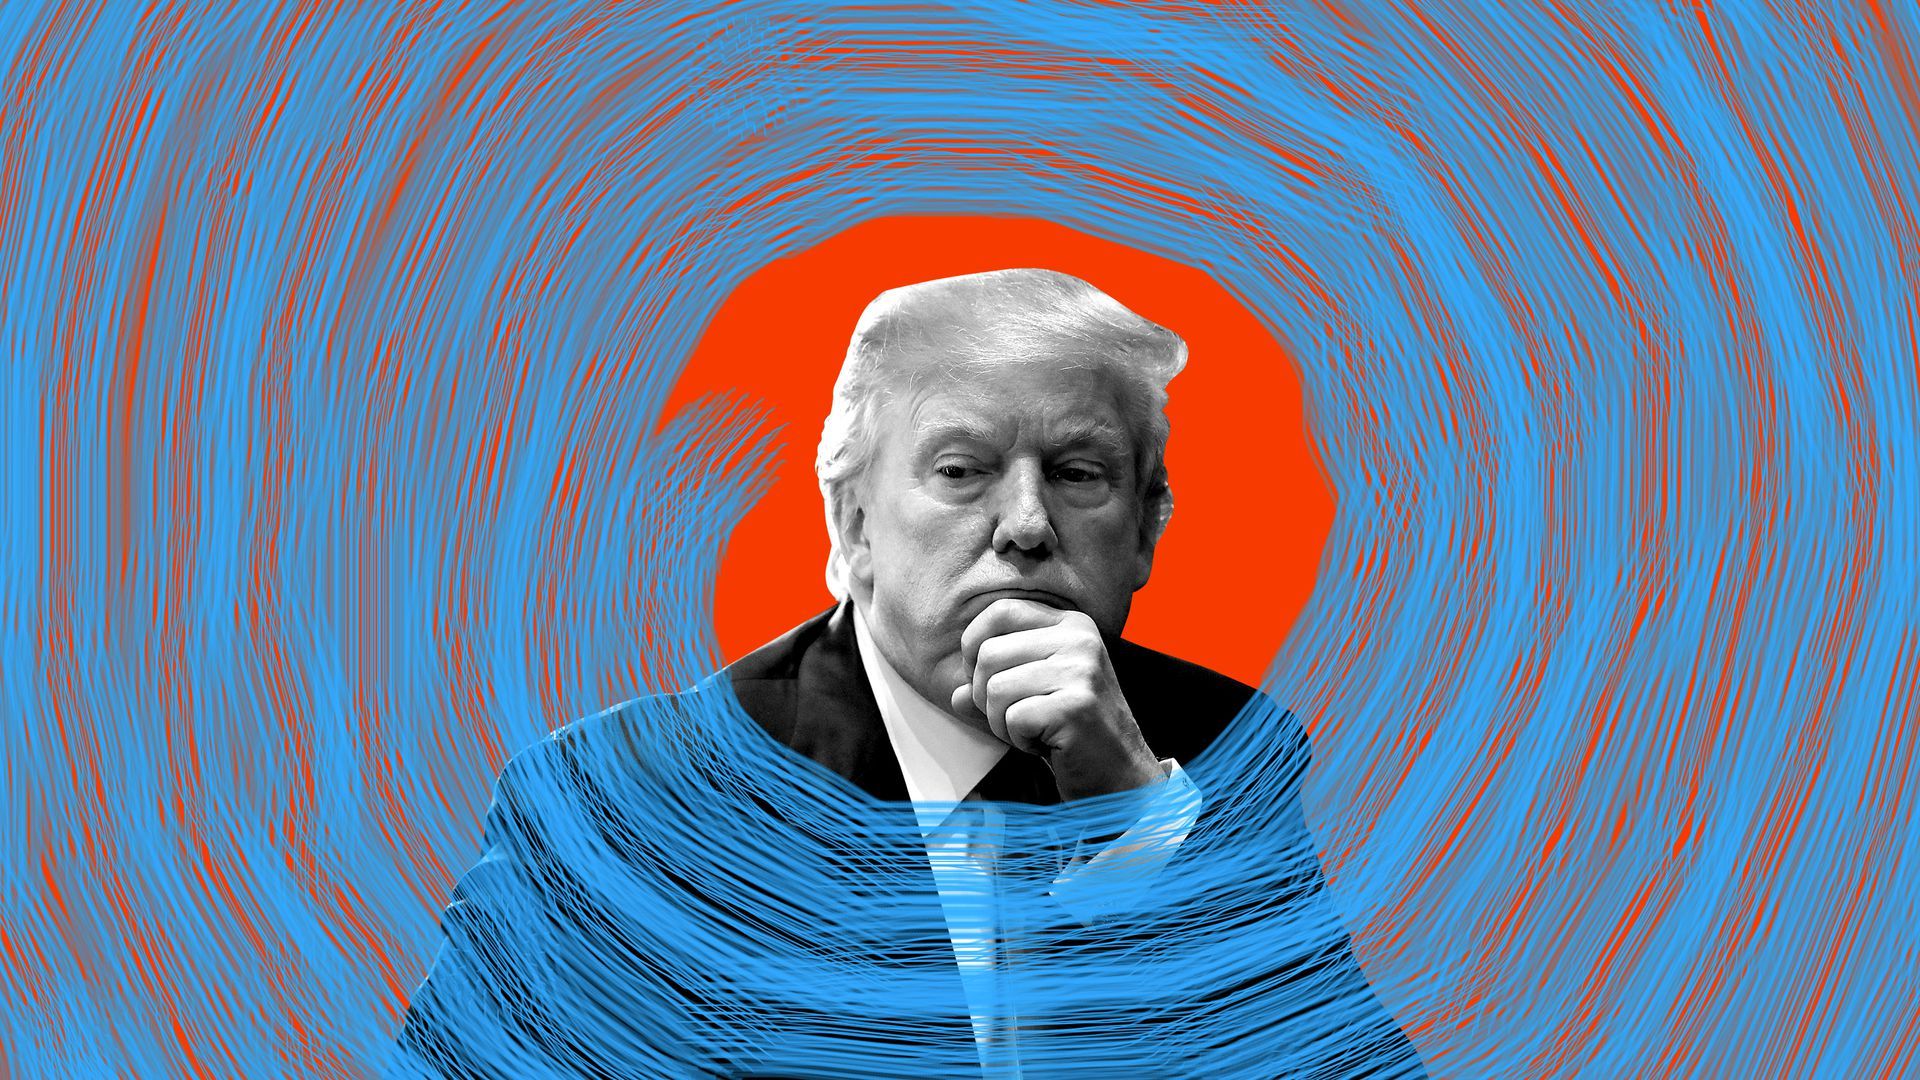 President Trump and a swirling vortex